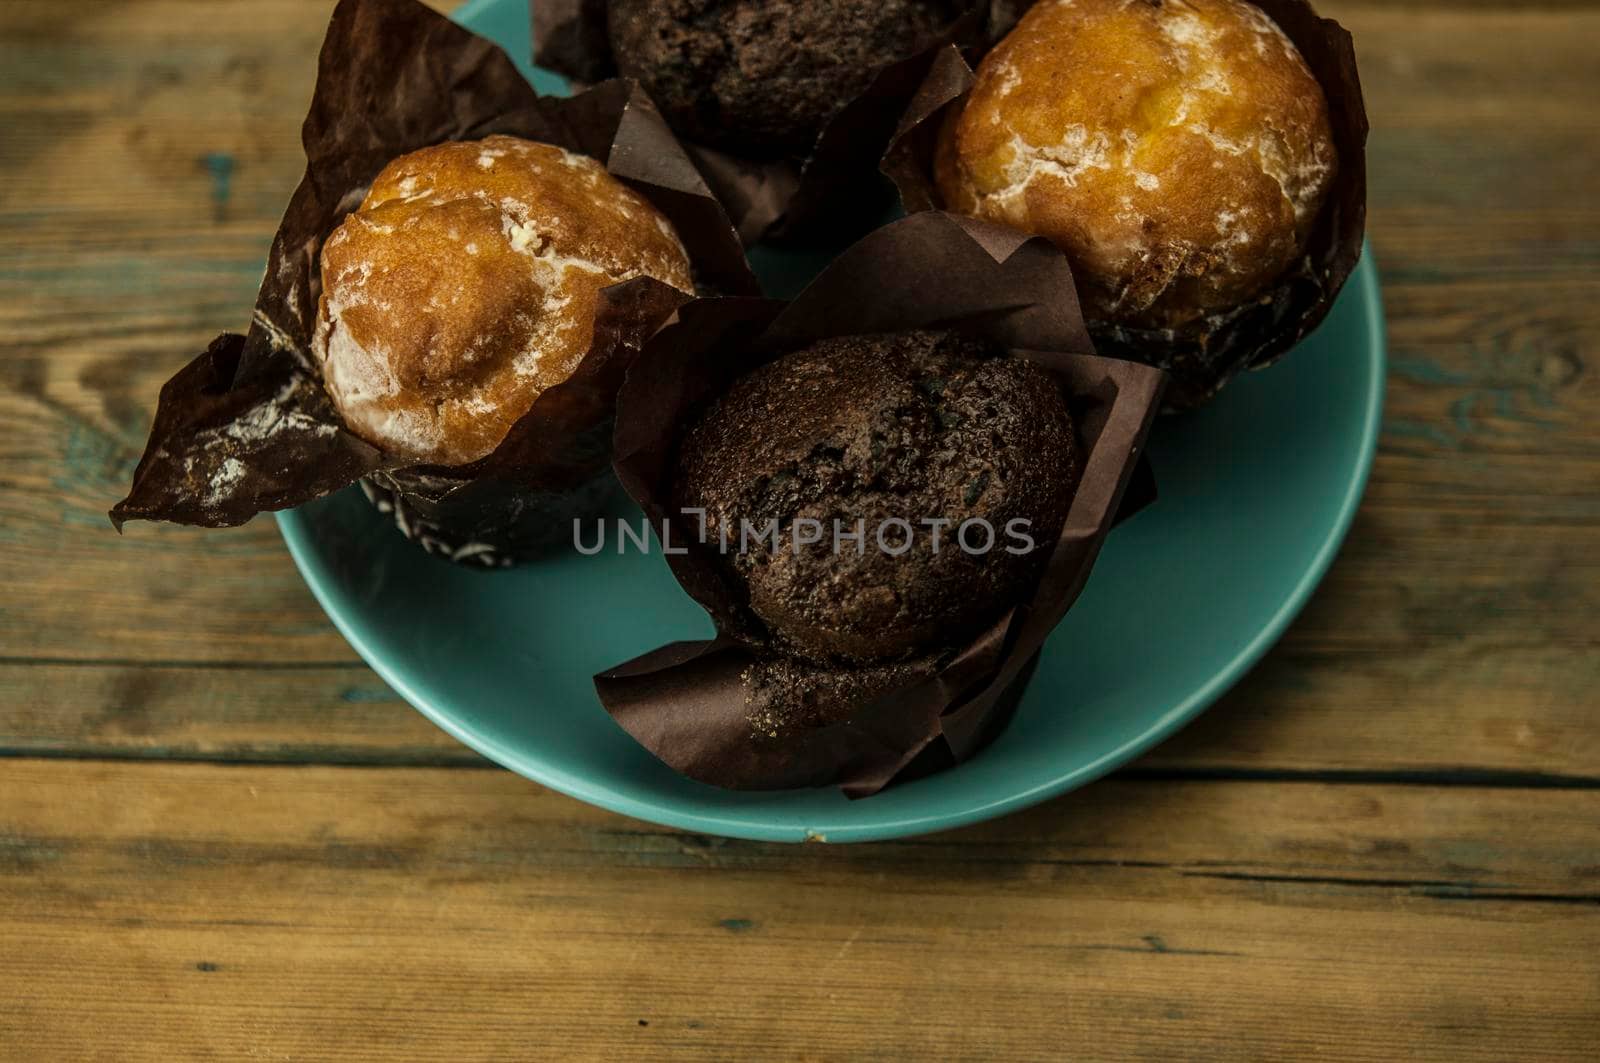 Homemade chocolate and vanilla cupcakes lie on ceramic plate on a wooden table, sprinkled with powdered sugar. Breakfast